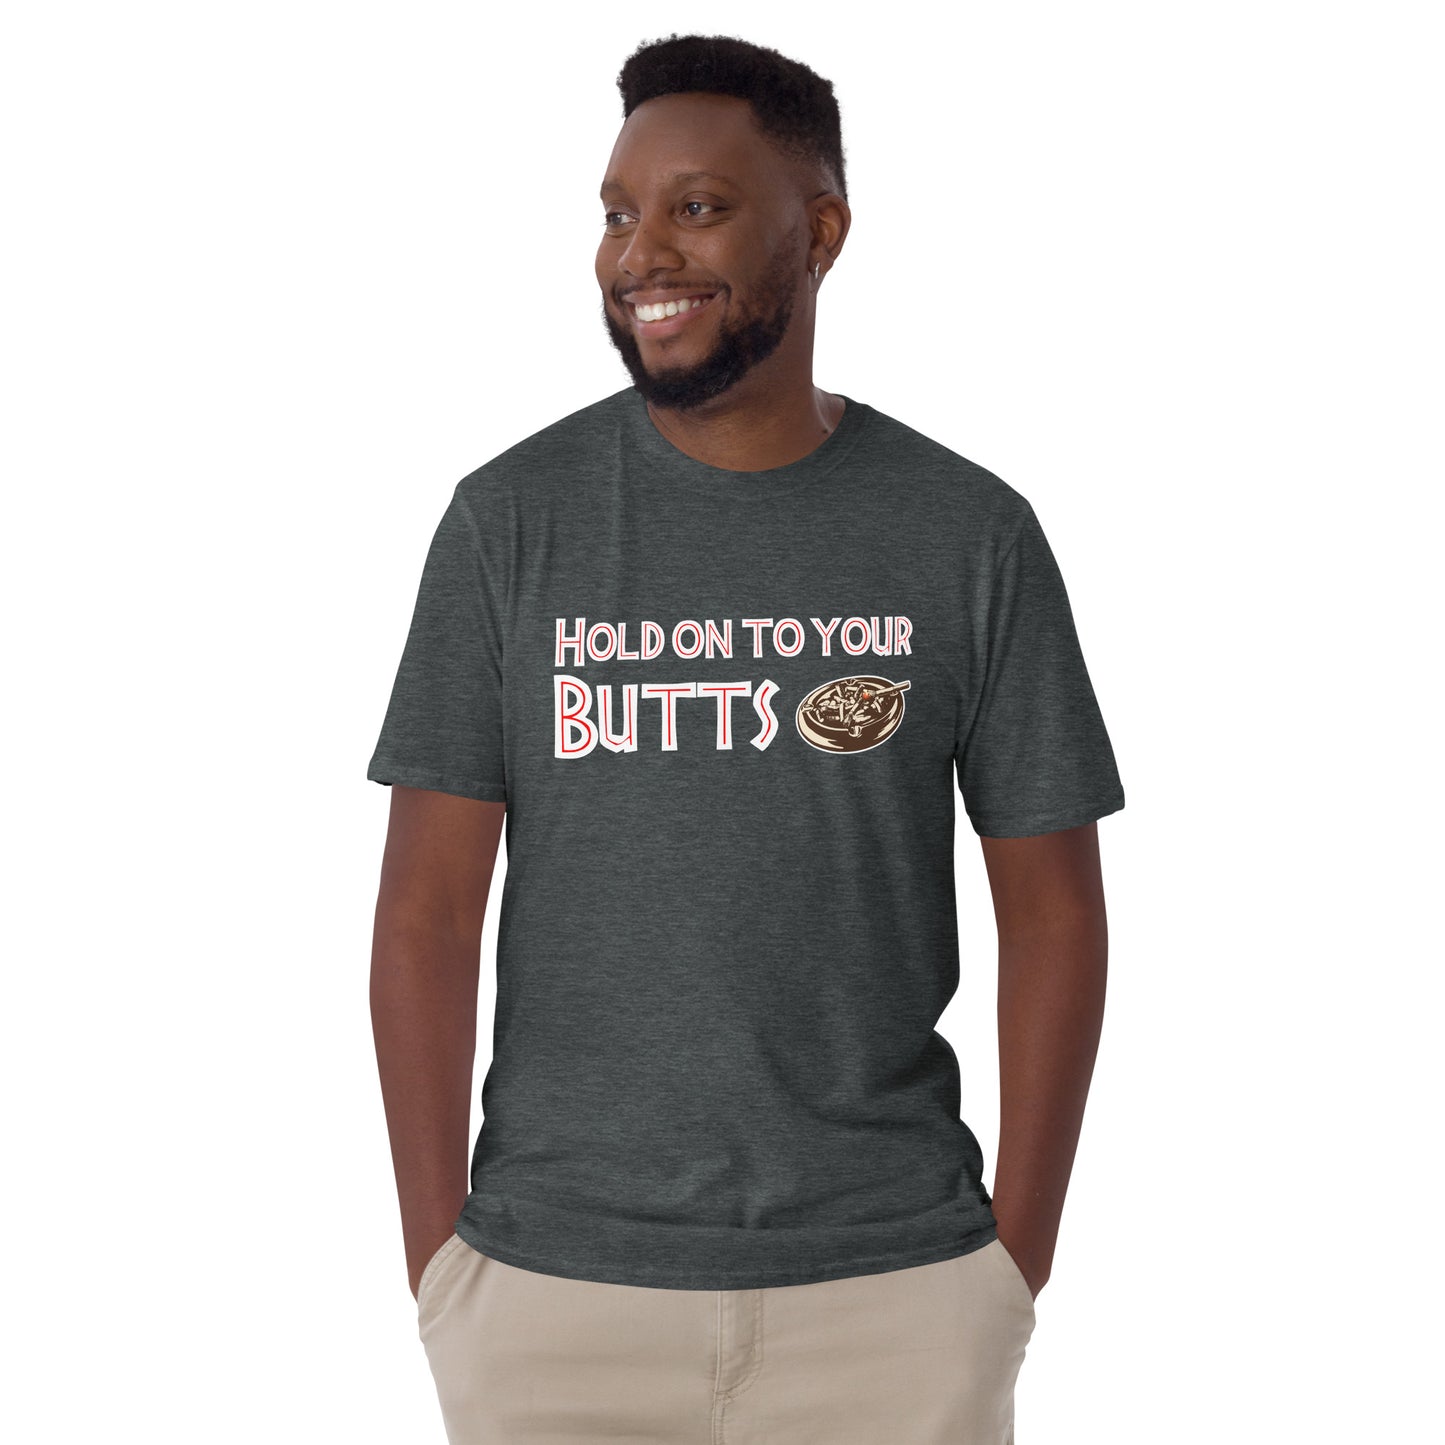 Hold on to your butts short-sleeve unisex t-shirt grey mockup